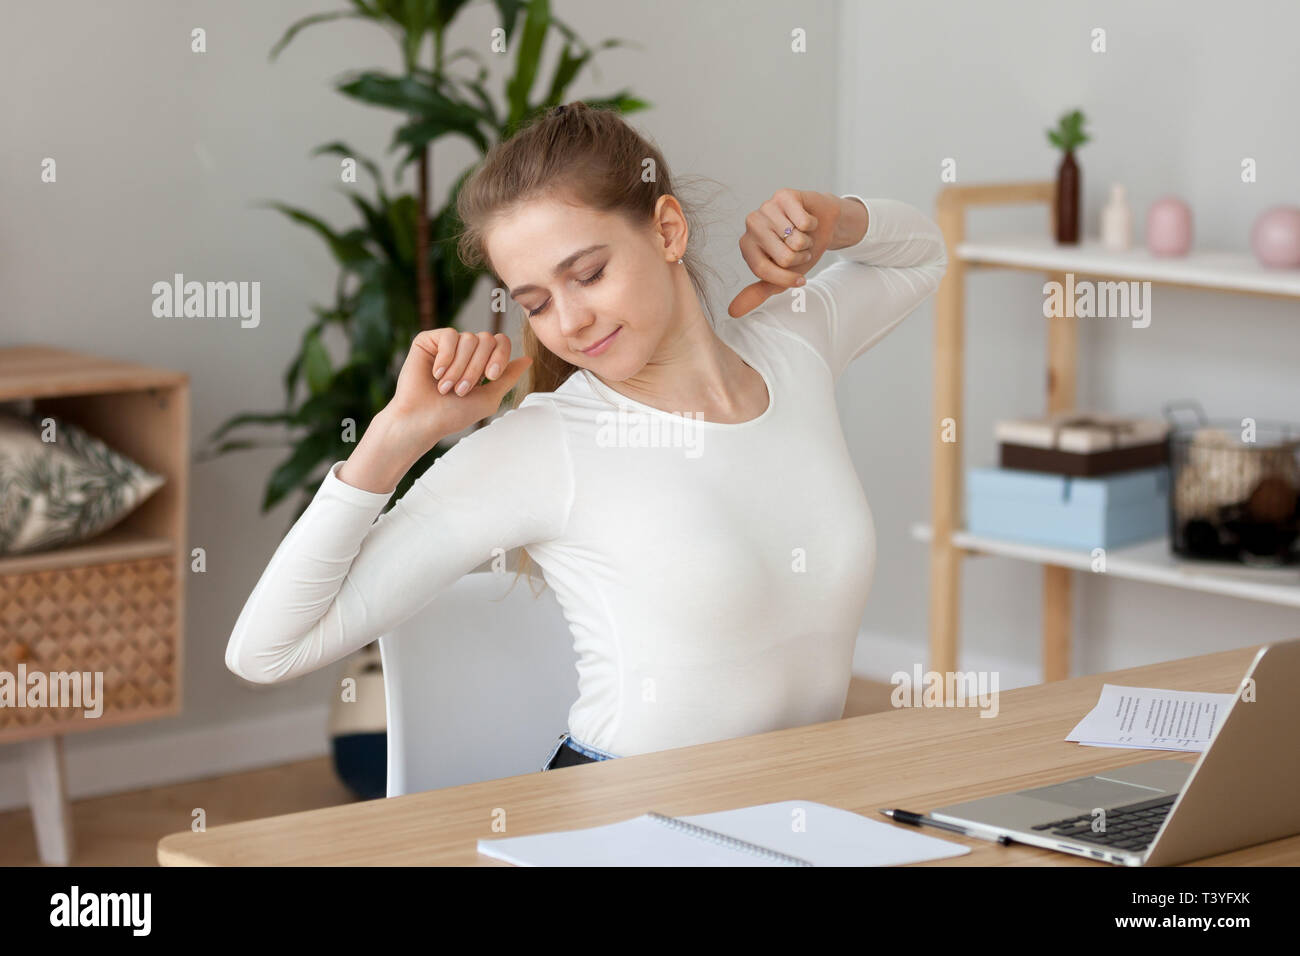 Satisfied young woman stretching, doing exercise at workplace Stock Photo